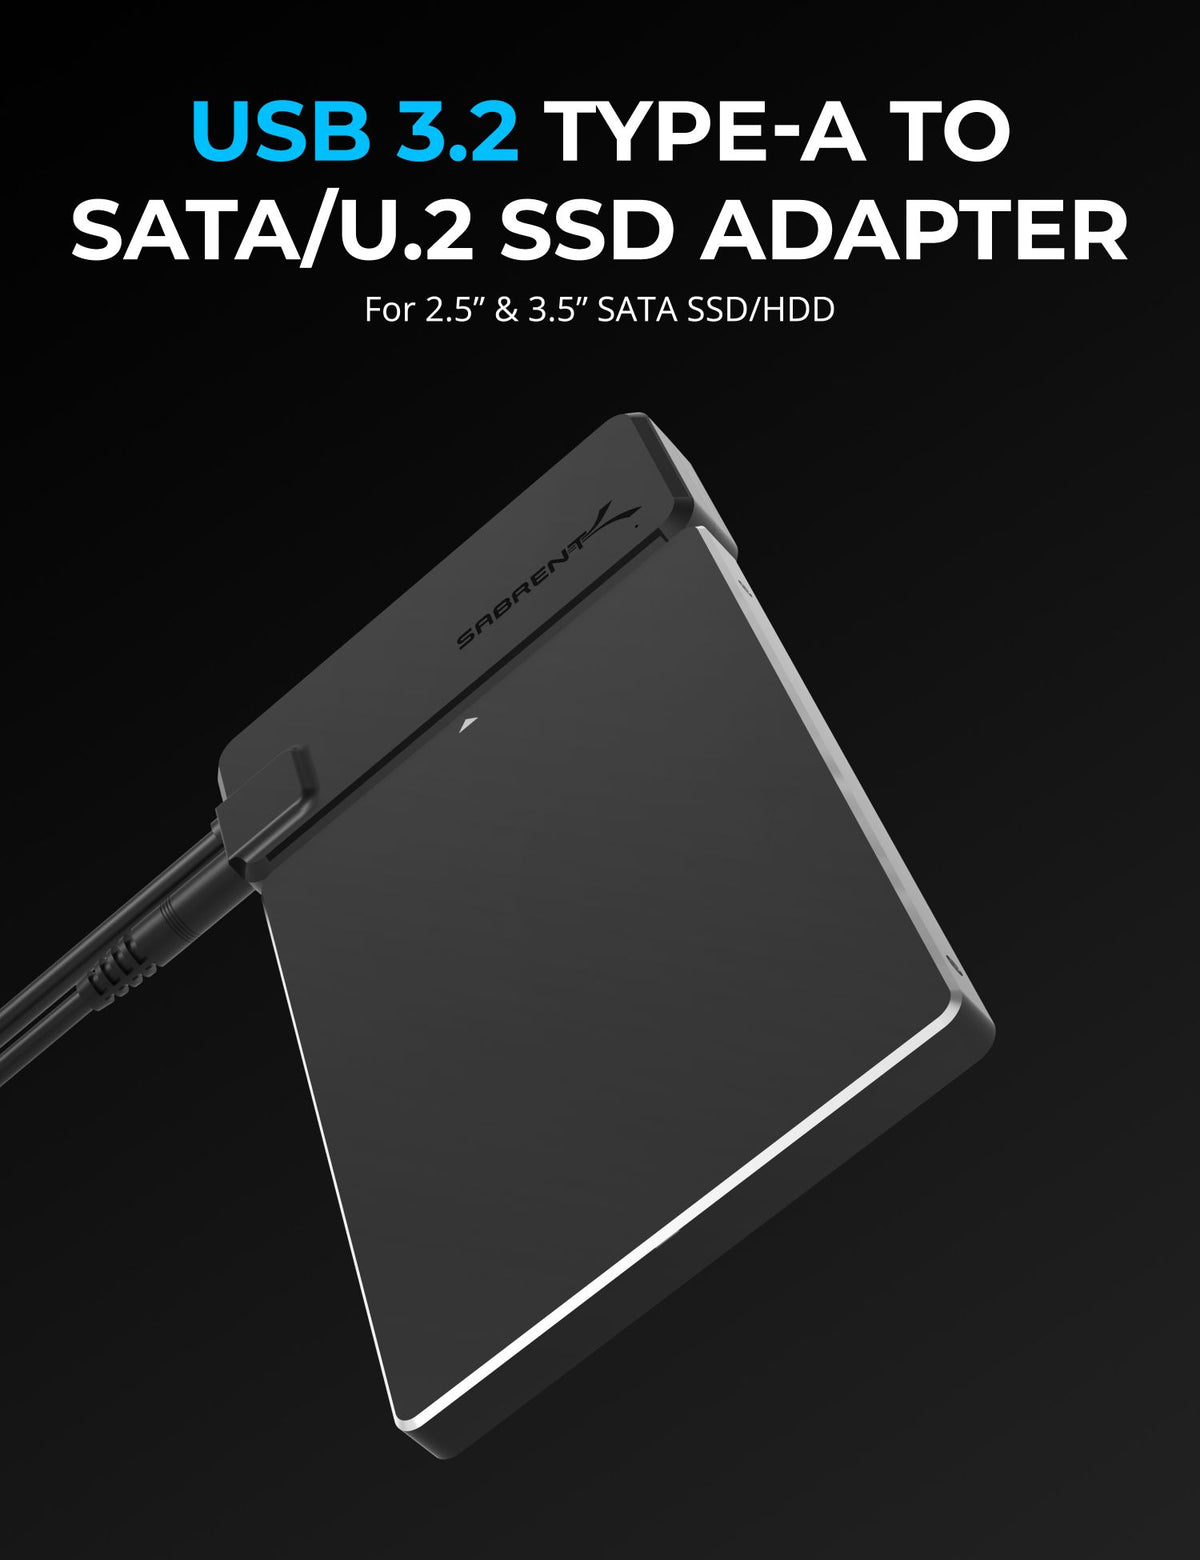 10Gbps USB 3.2 Type-A to SATA/U.2 SSD Adapter Cable